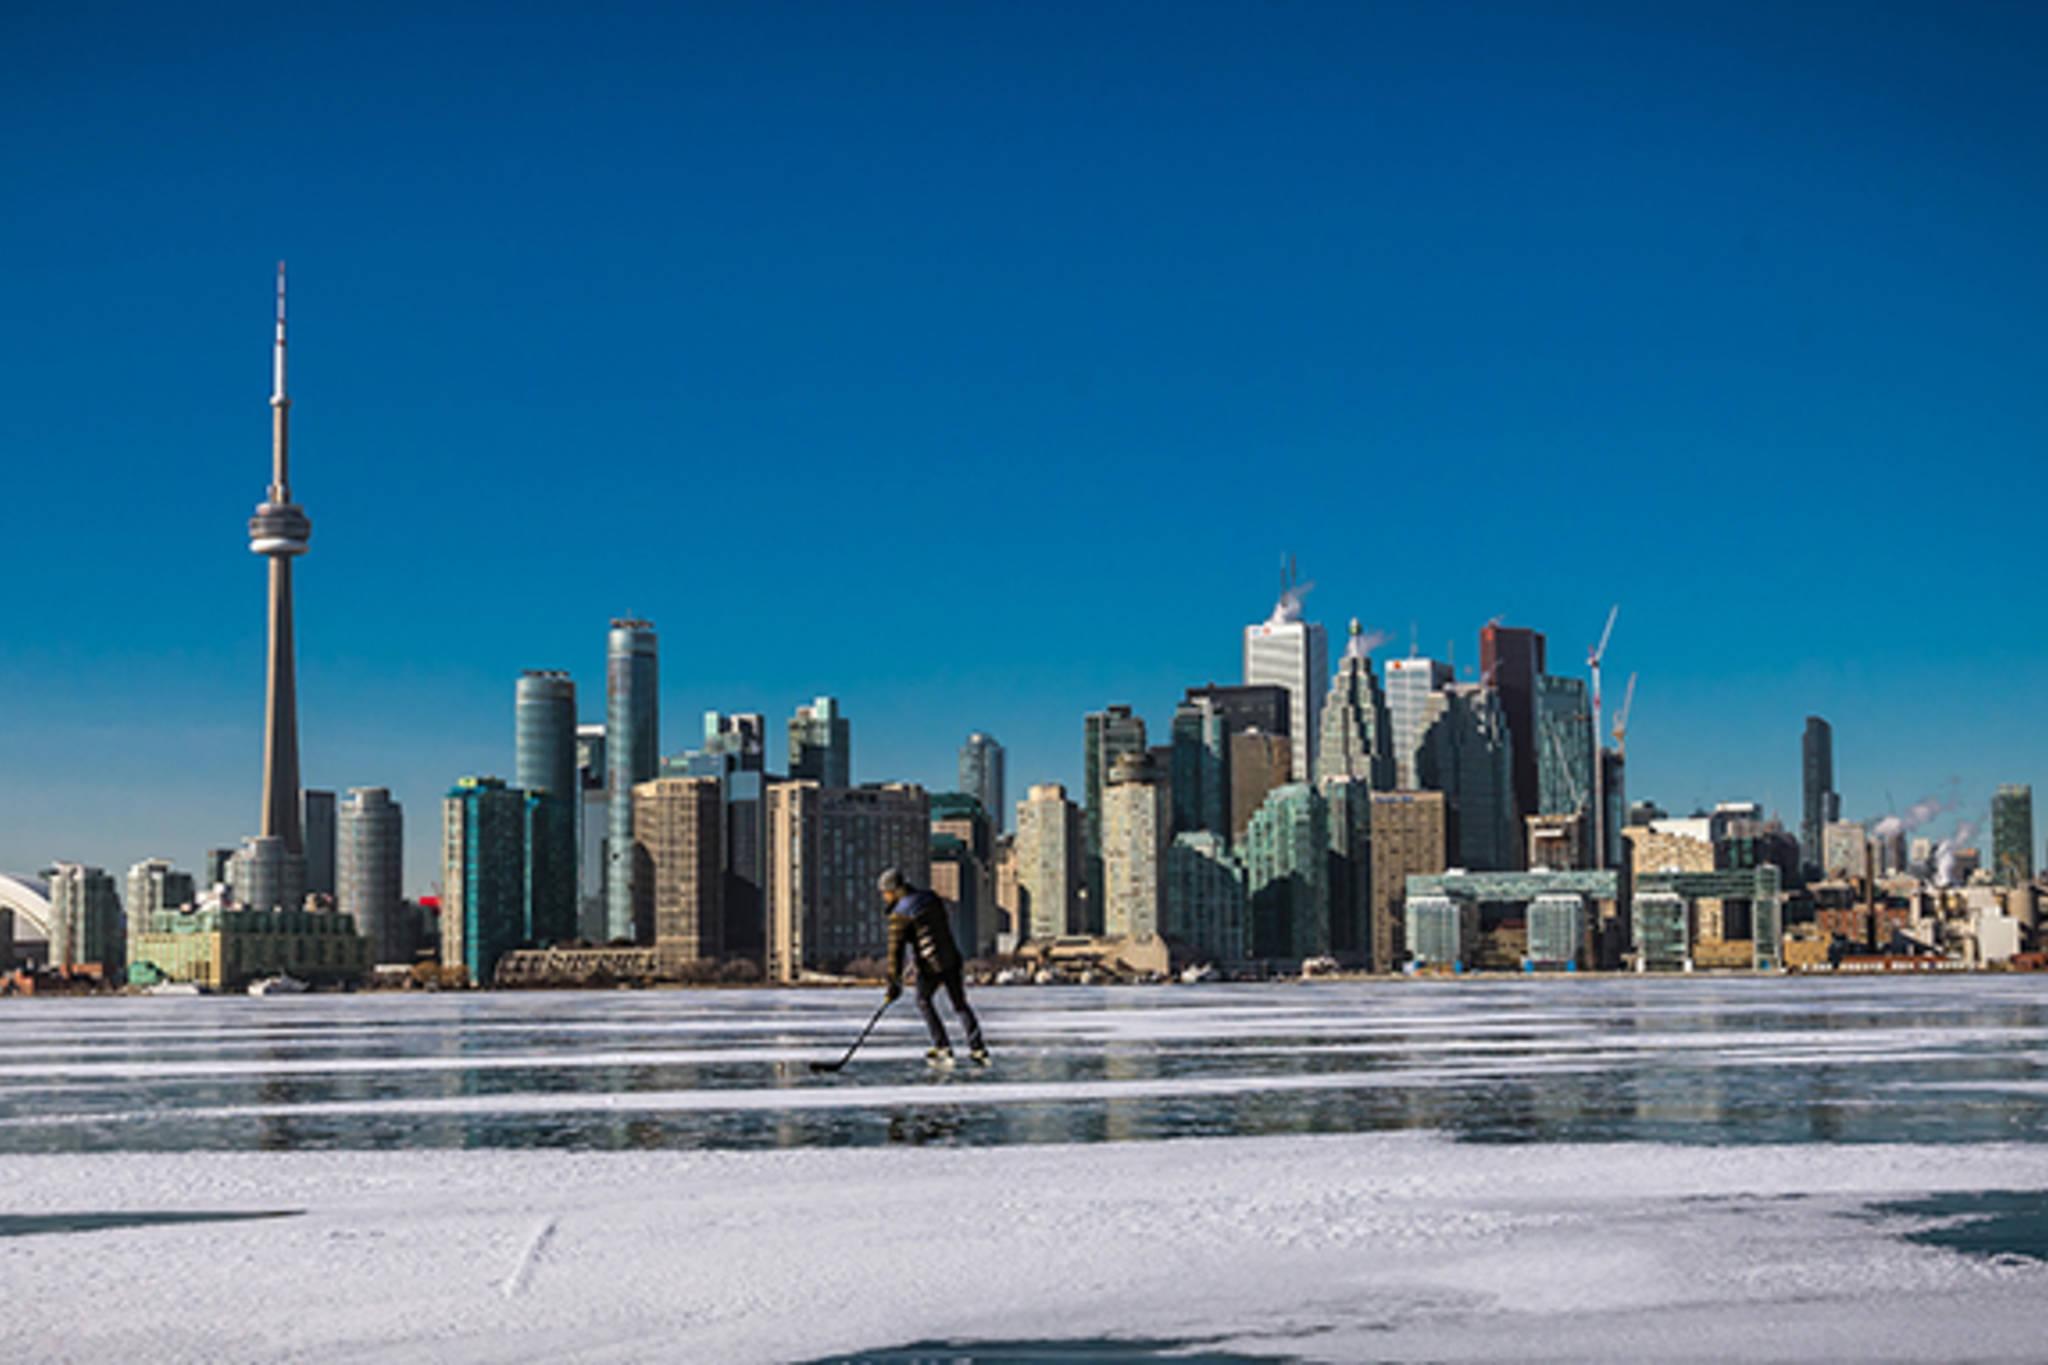 photo that prove Toronto is beautiful in the winter